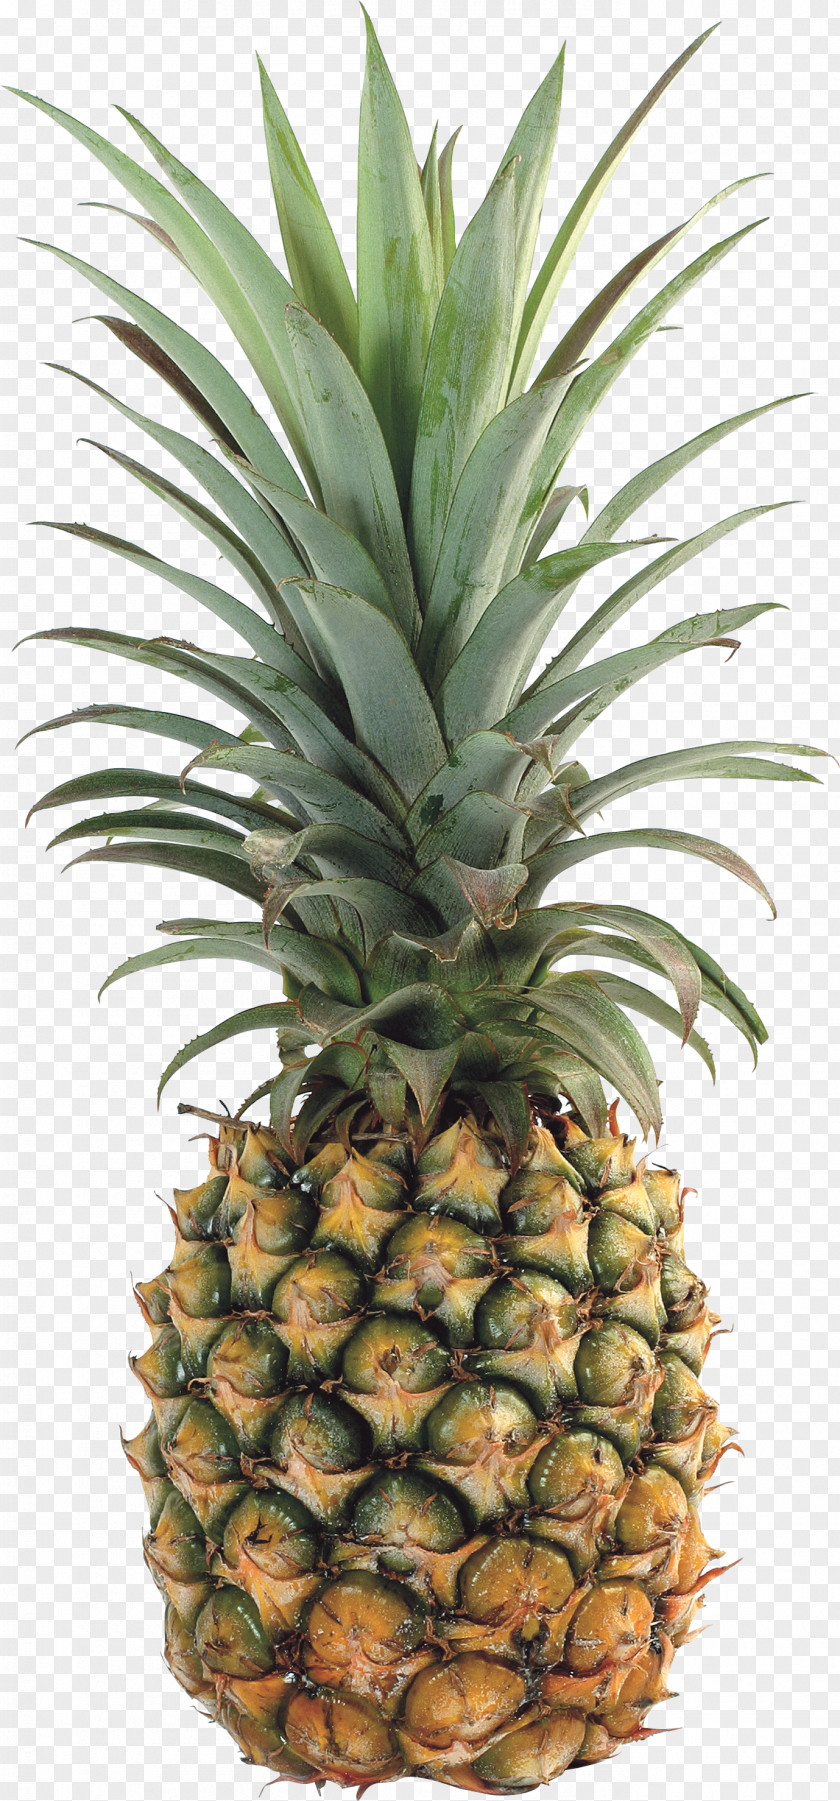 Pineapple Image, Free Download Upside-down Cake Tropical Fruit PNG